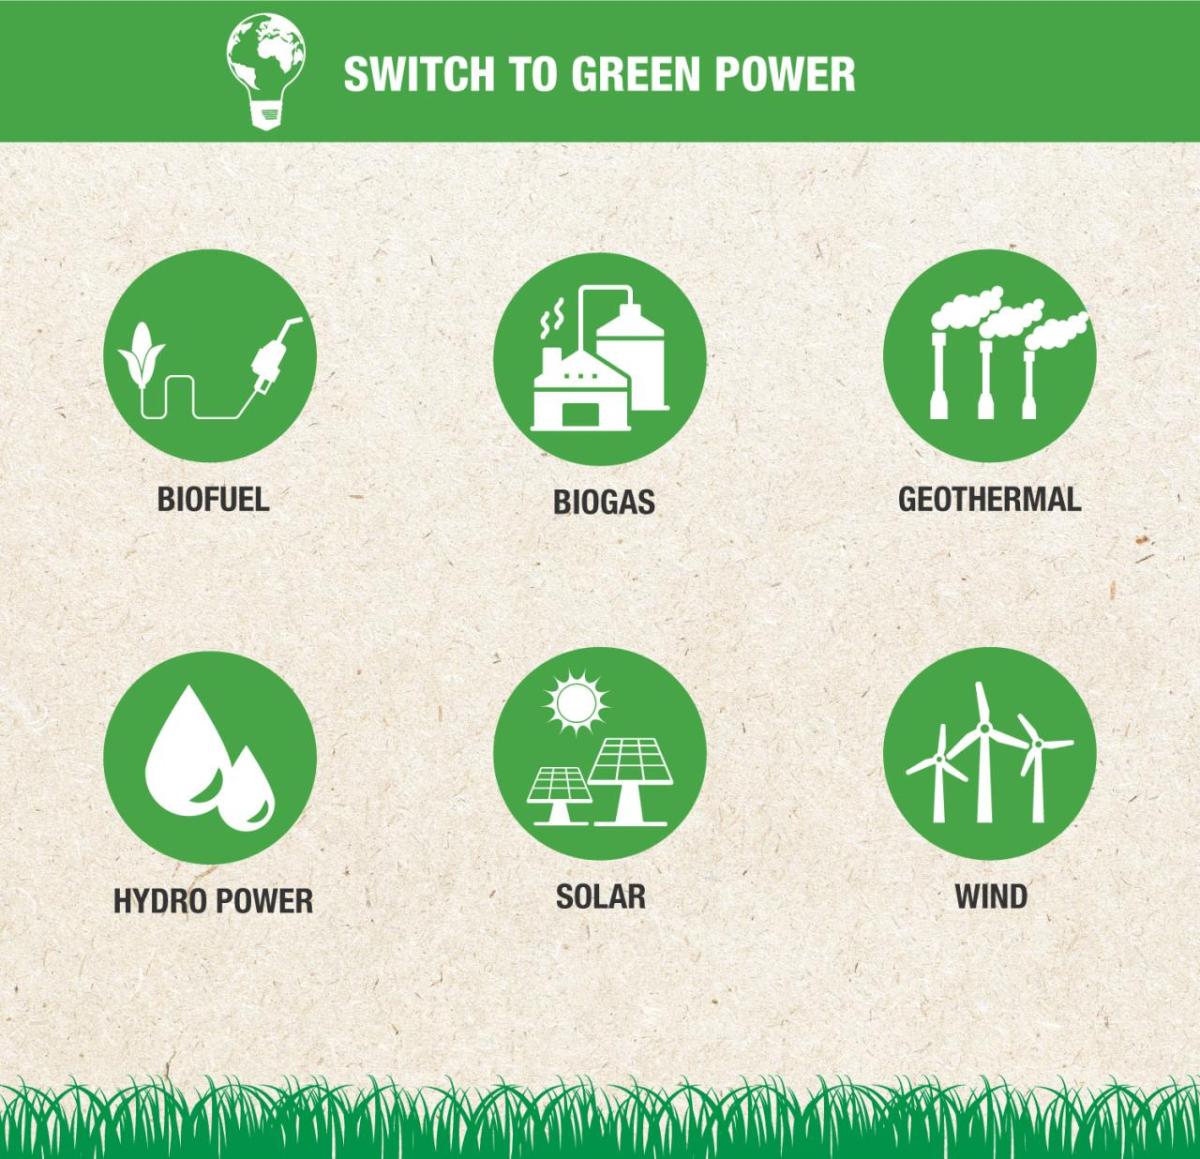 Switch to green power examples